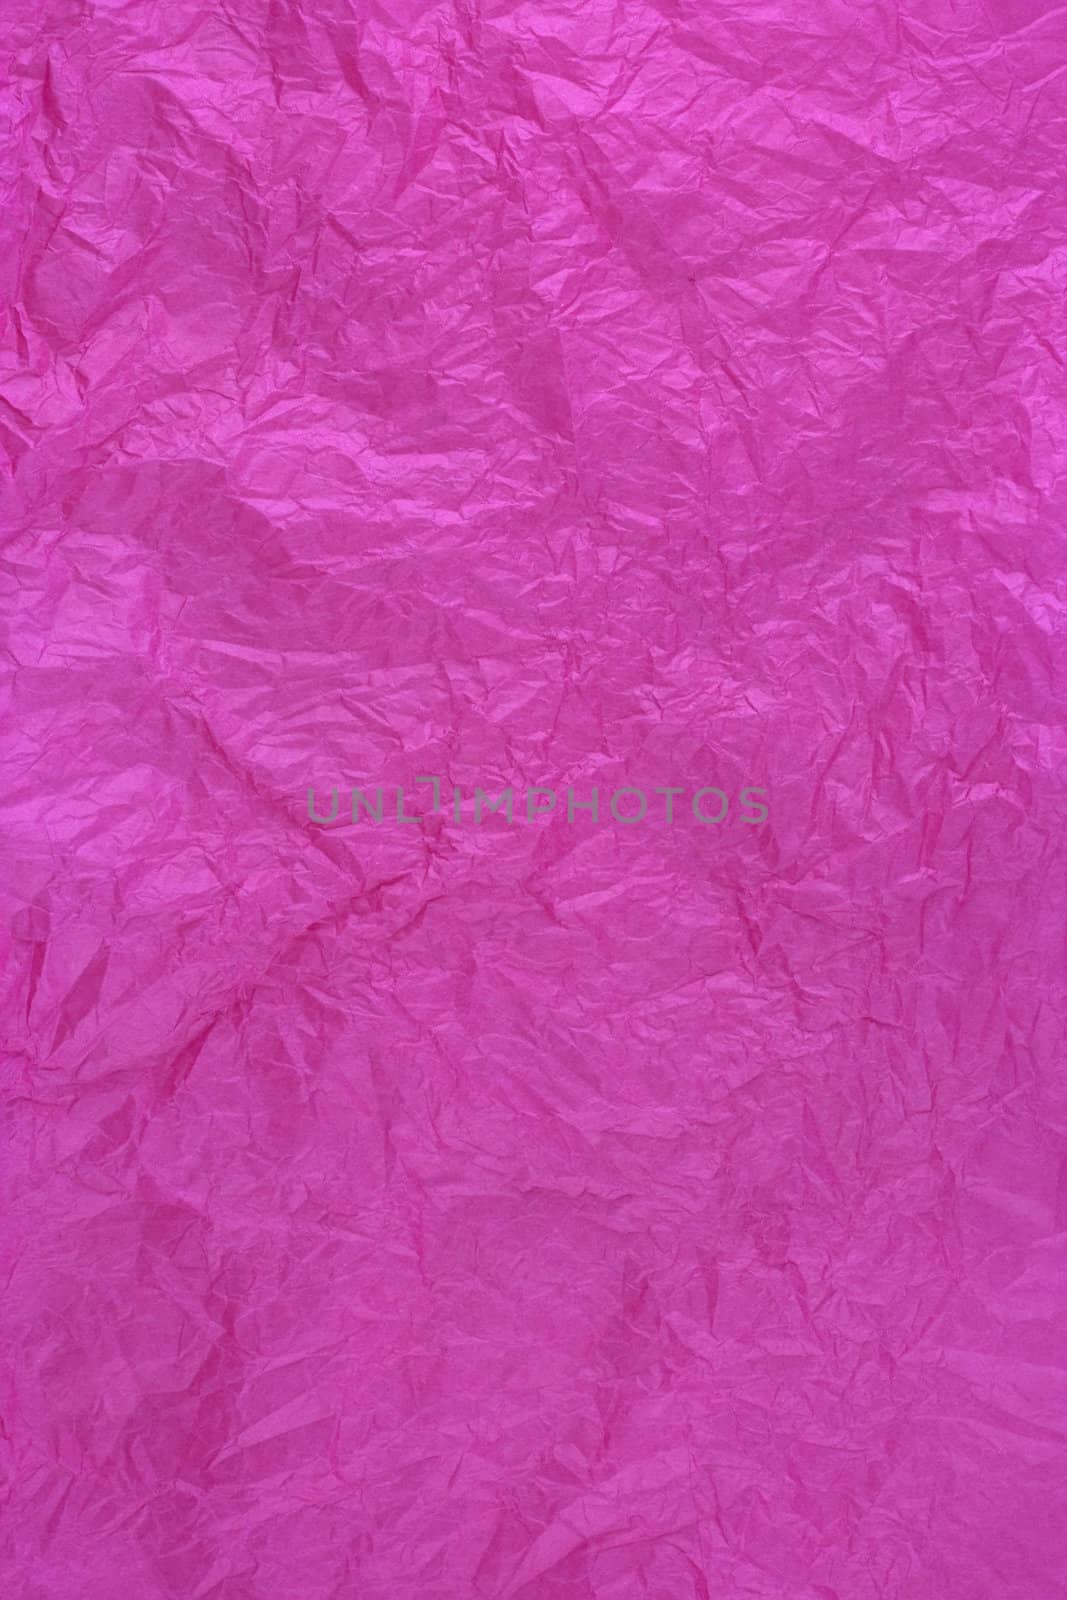 dark pink tissue wrapping paper texture, crumpled and wrinkled